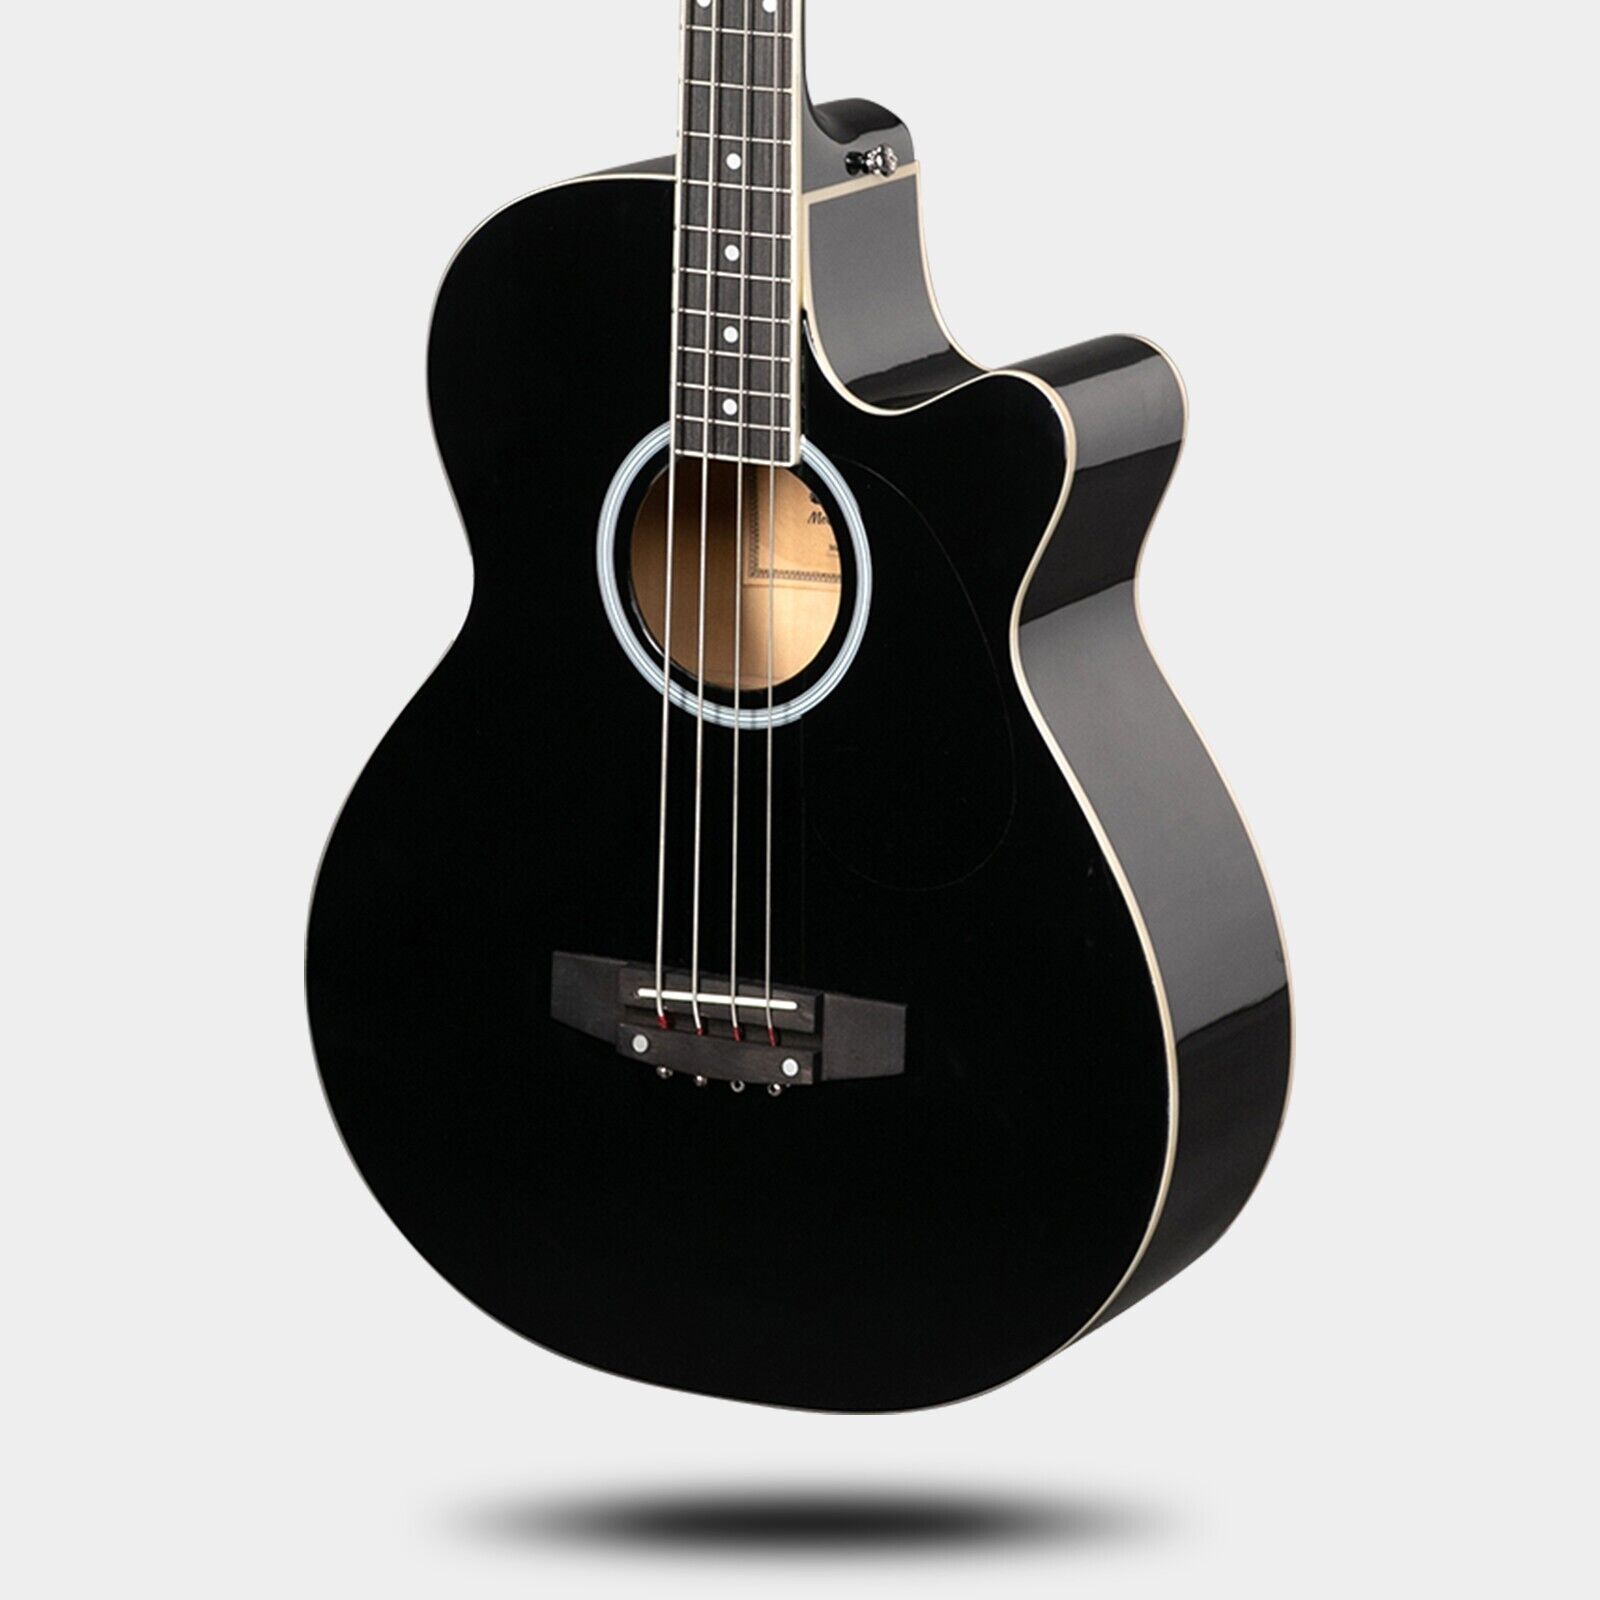 Glarry GMB101 Black 4 string Electric Acoustic Bass Guitar w/ 4-Band Equalizer 13